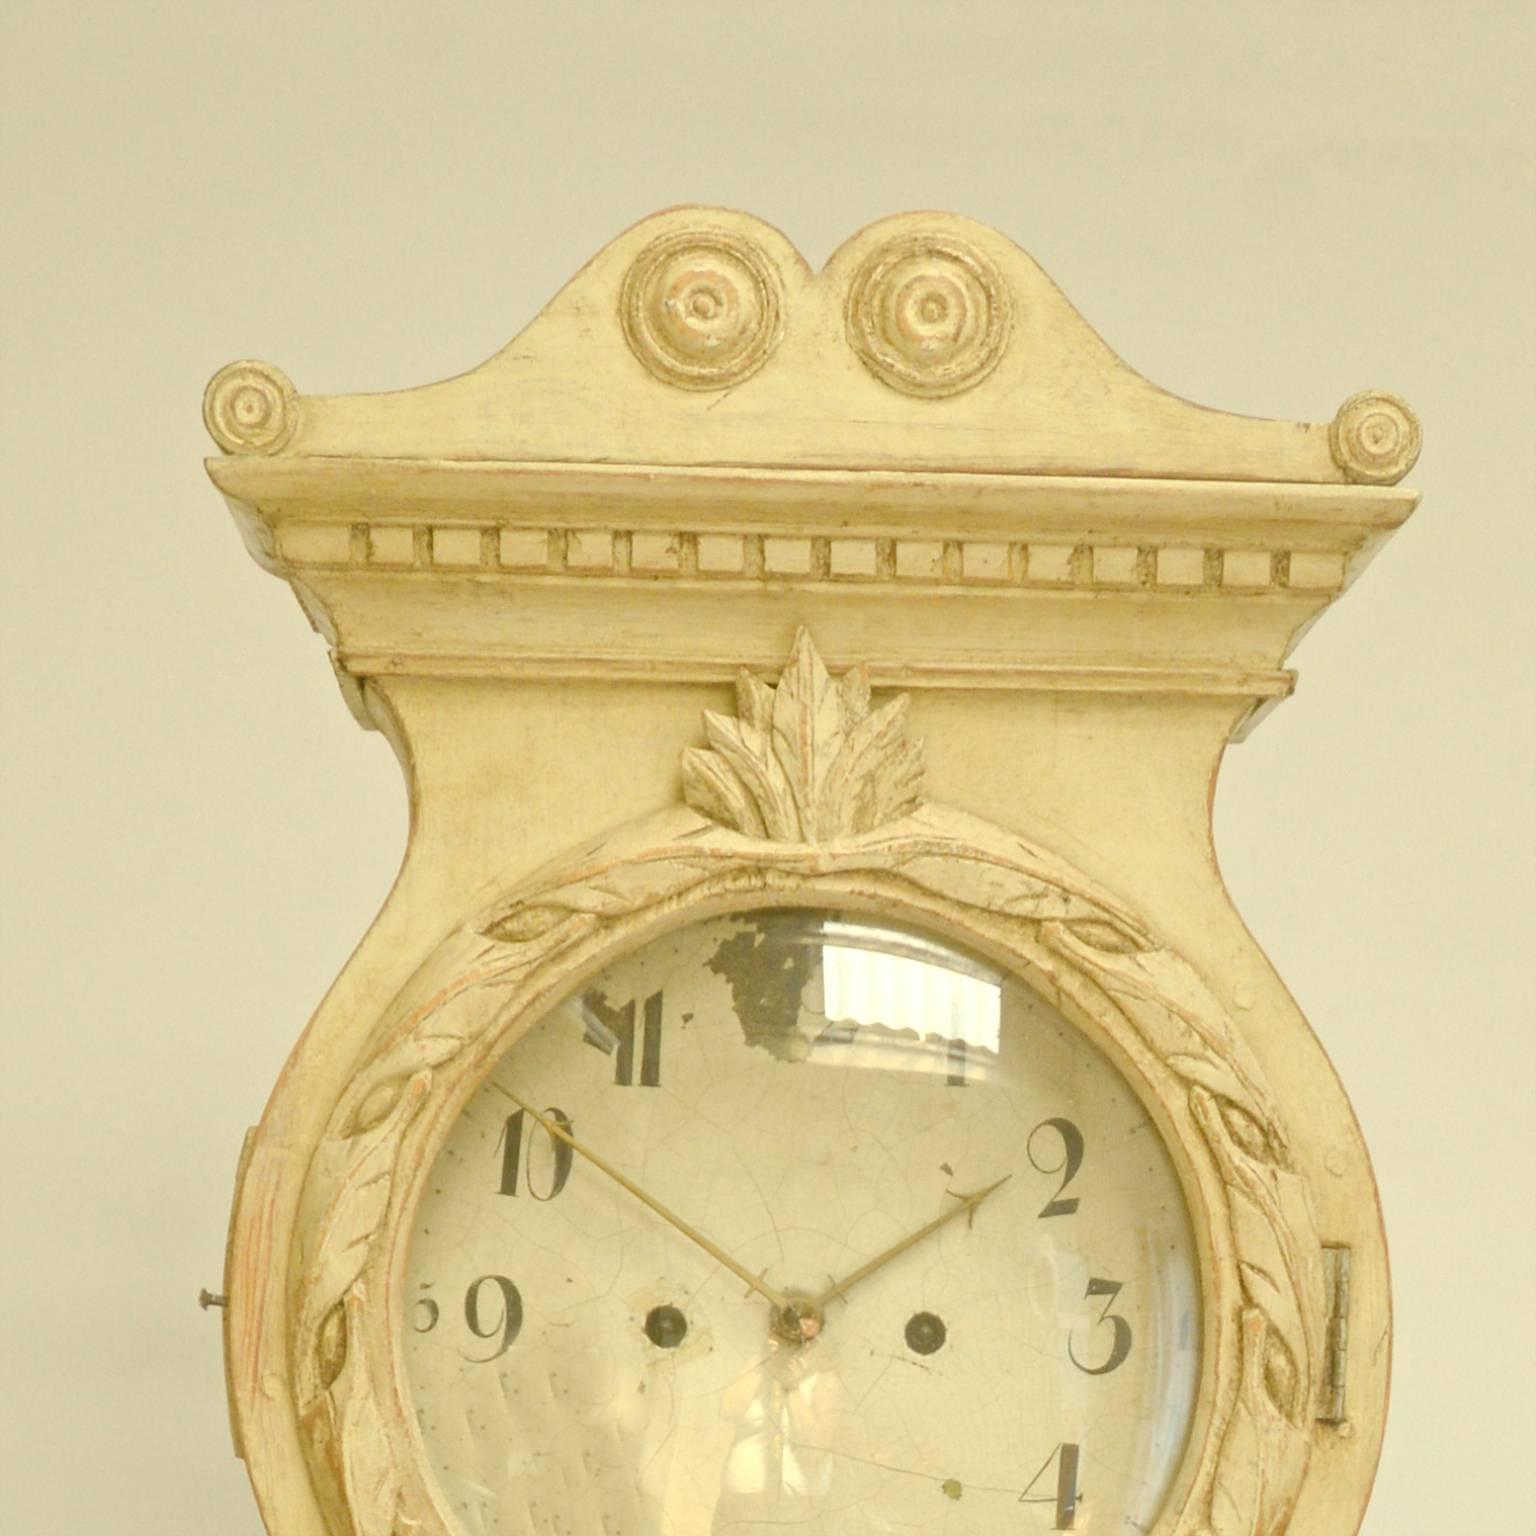 Wonderful 1800s Swedish antique Mora clock with sumptuous carved detail in the classic Gustavian style.

Clocks like these are very rare and hard to find - intricate carved swags, wreaths, highly decorated crown, pyramid base.

This original 1800s